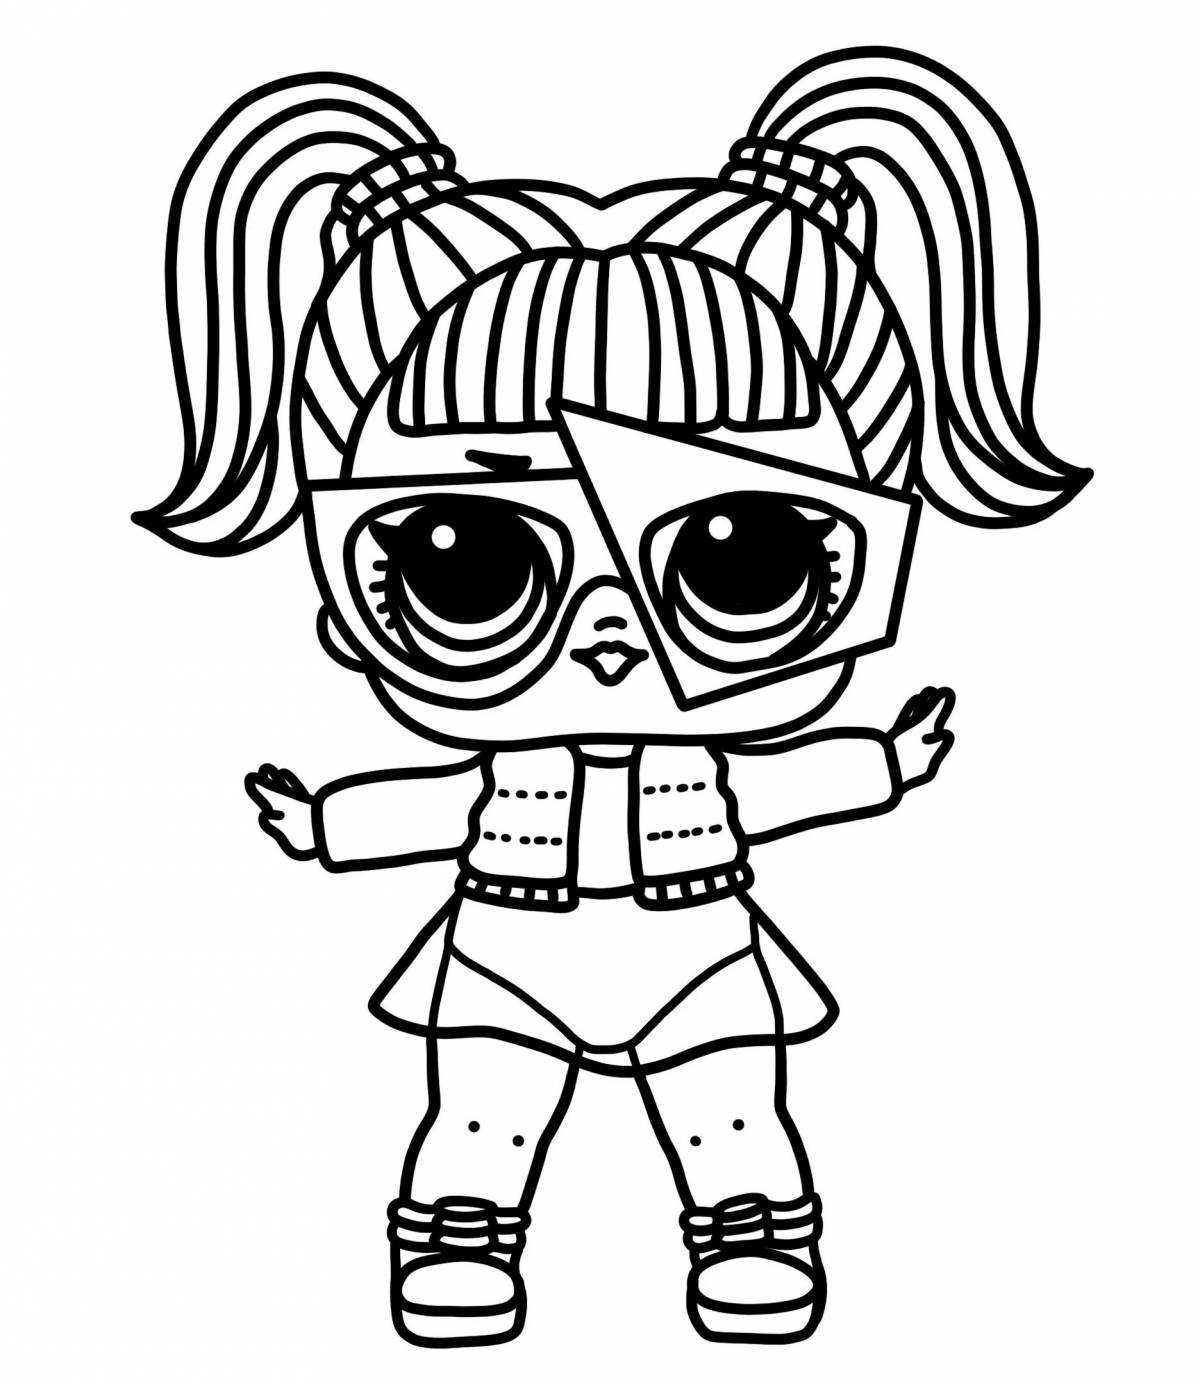 Fabulous coloring page lol doll new series